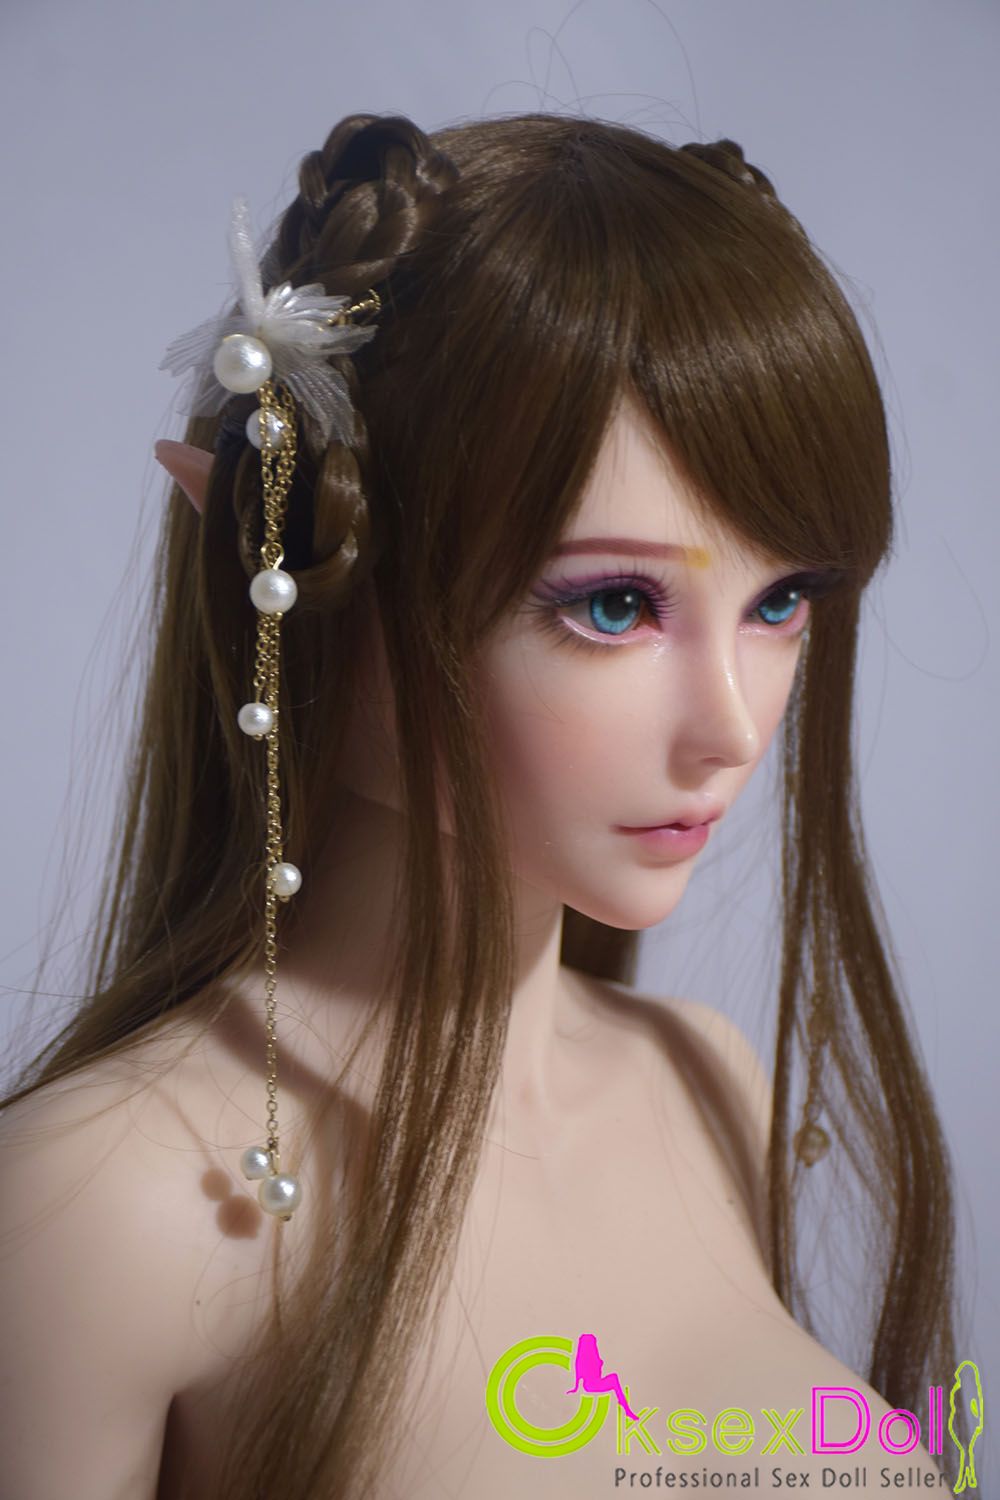 elsababe-doll.html F-cup Dolls Pictures